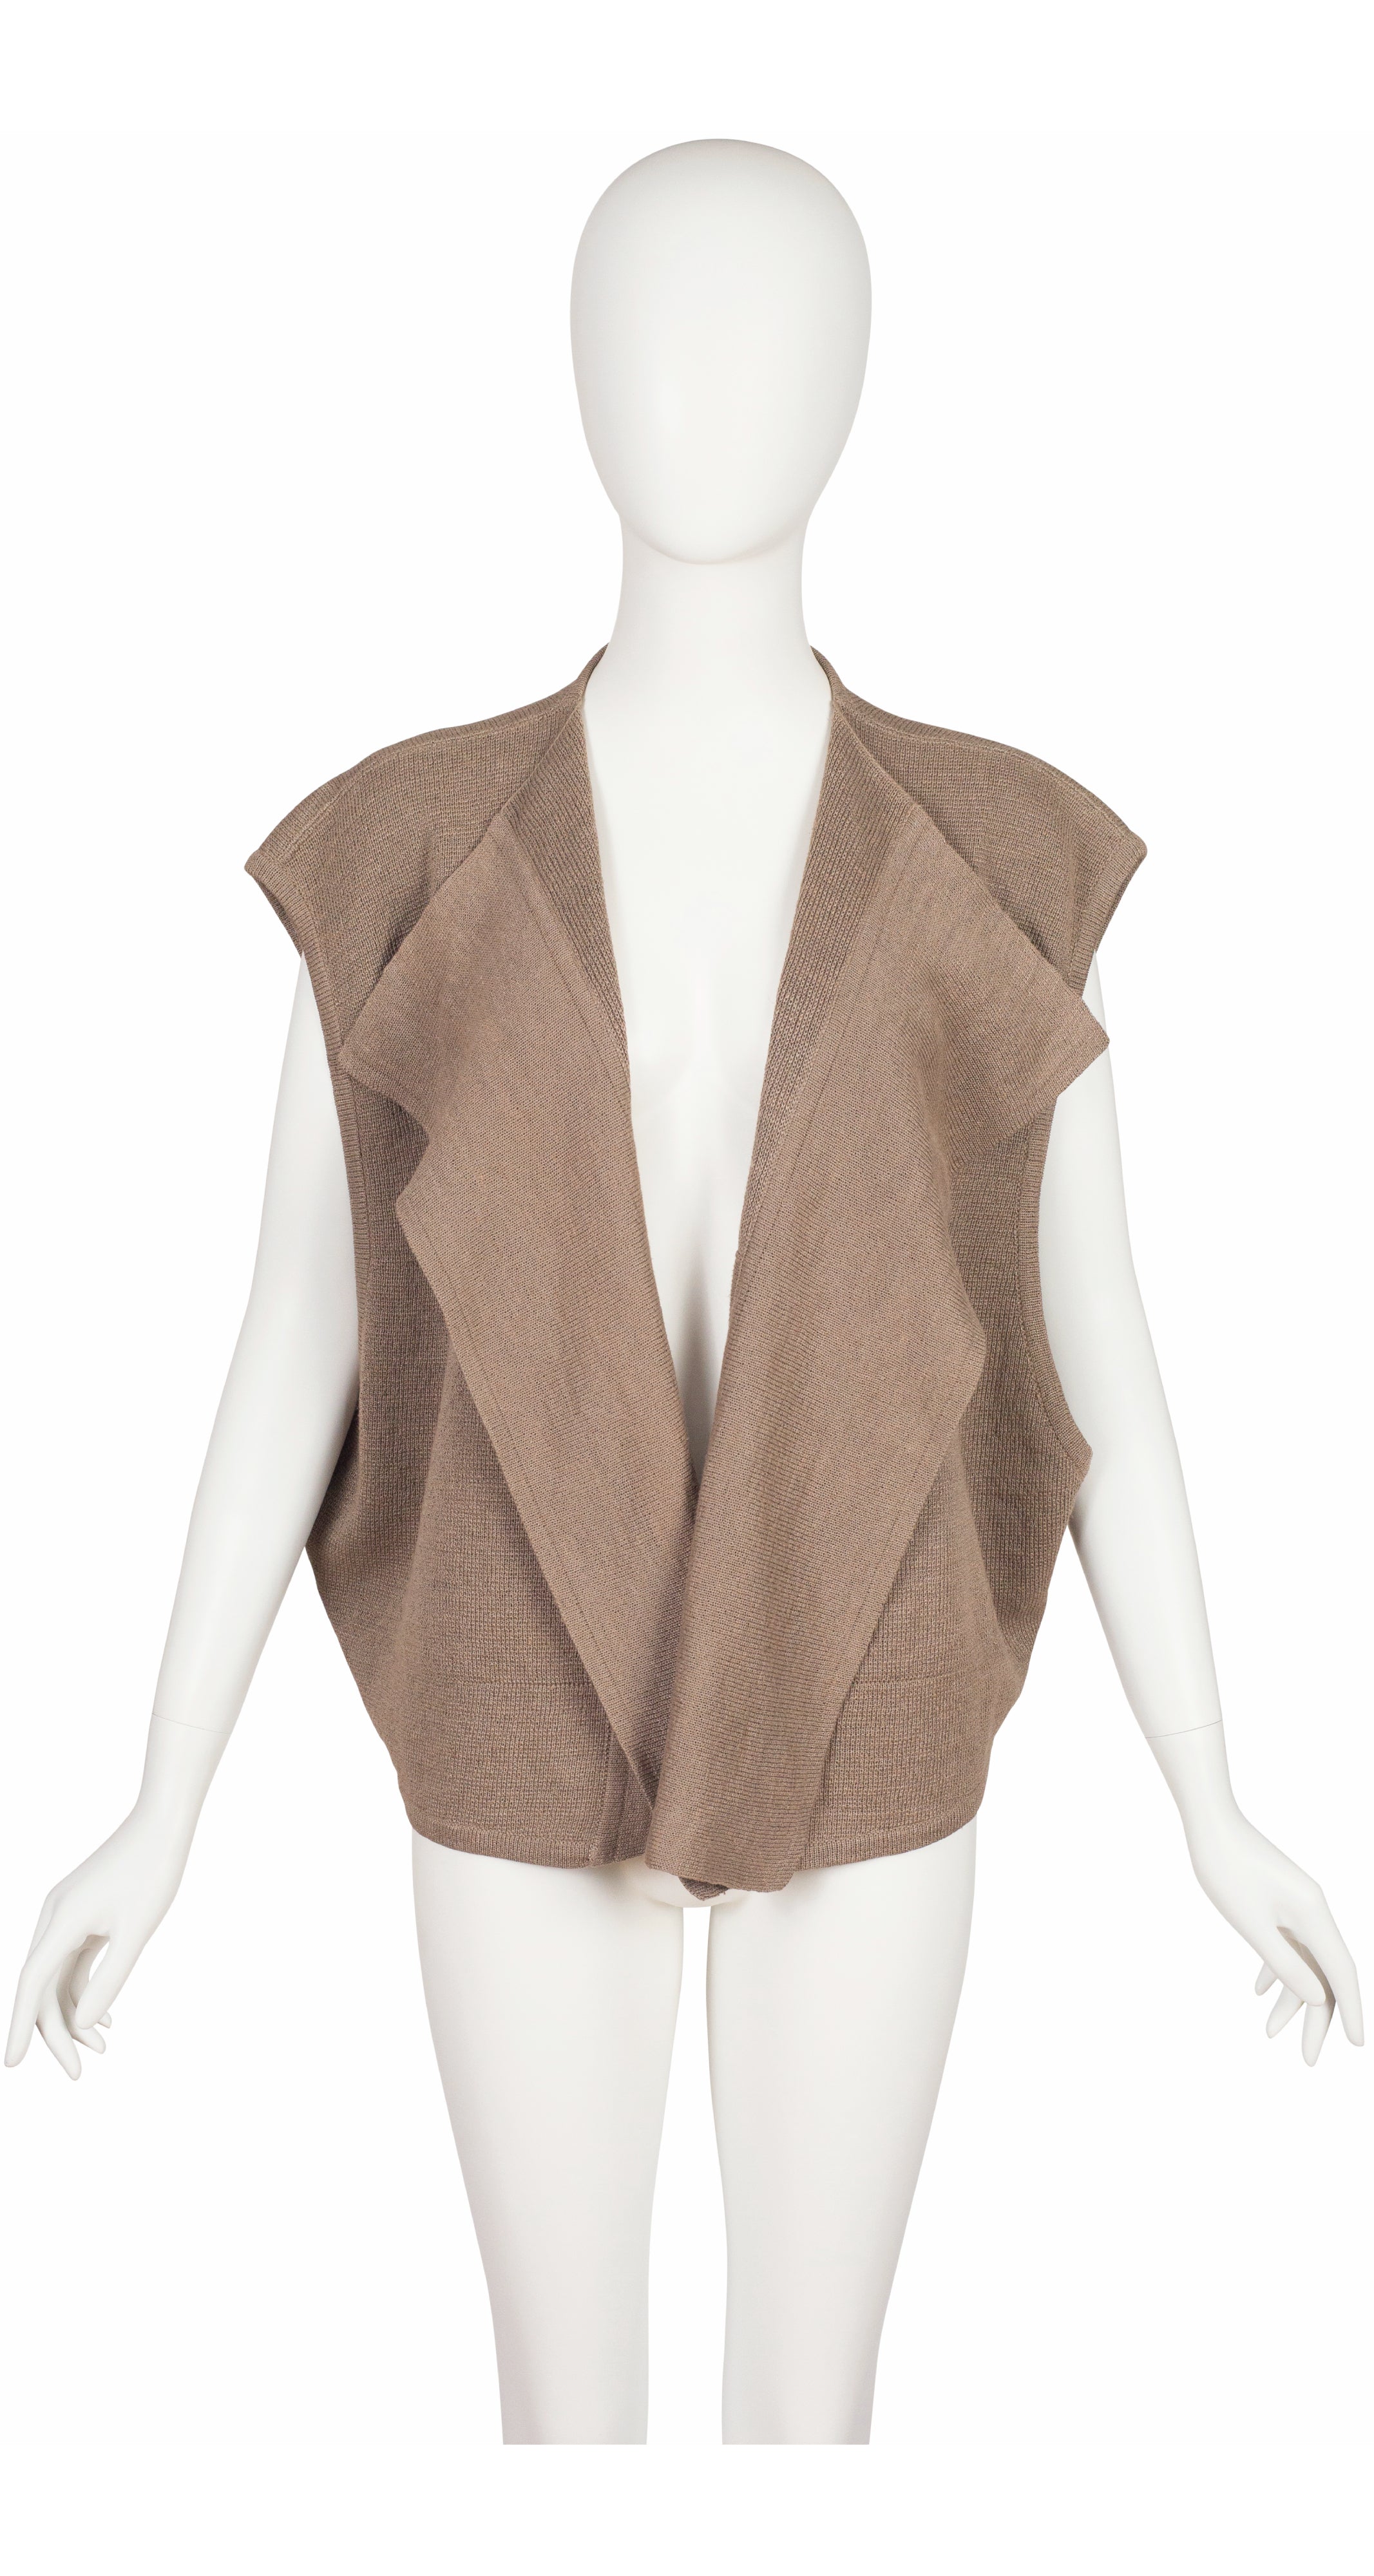 1980s Taupe Rayon Knit Open Front Vest